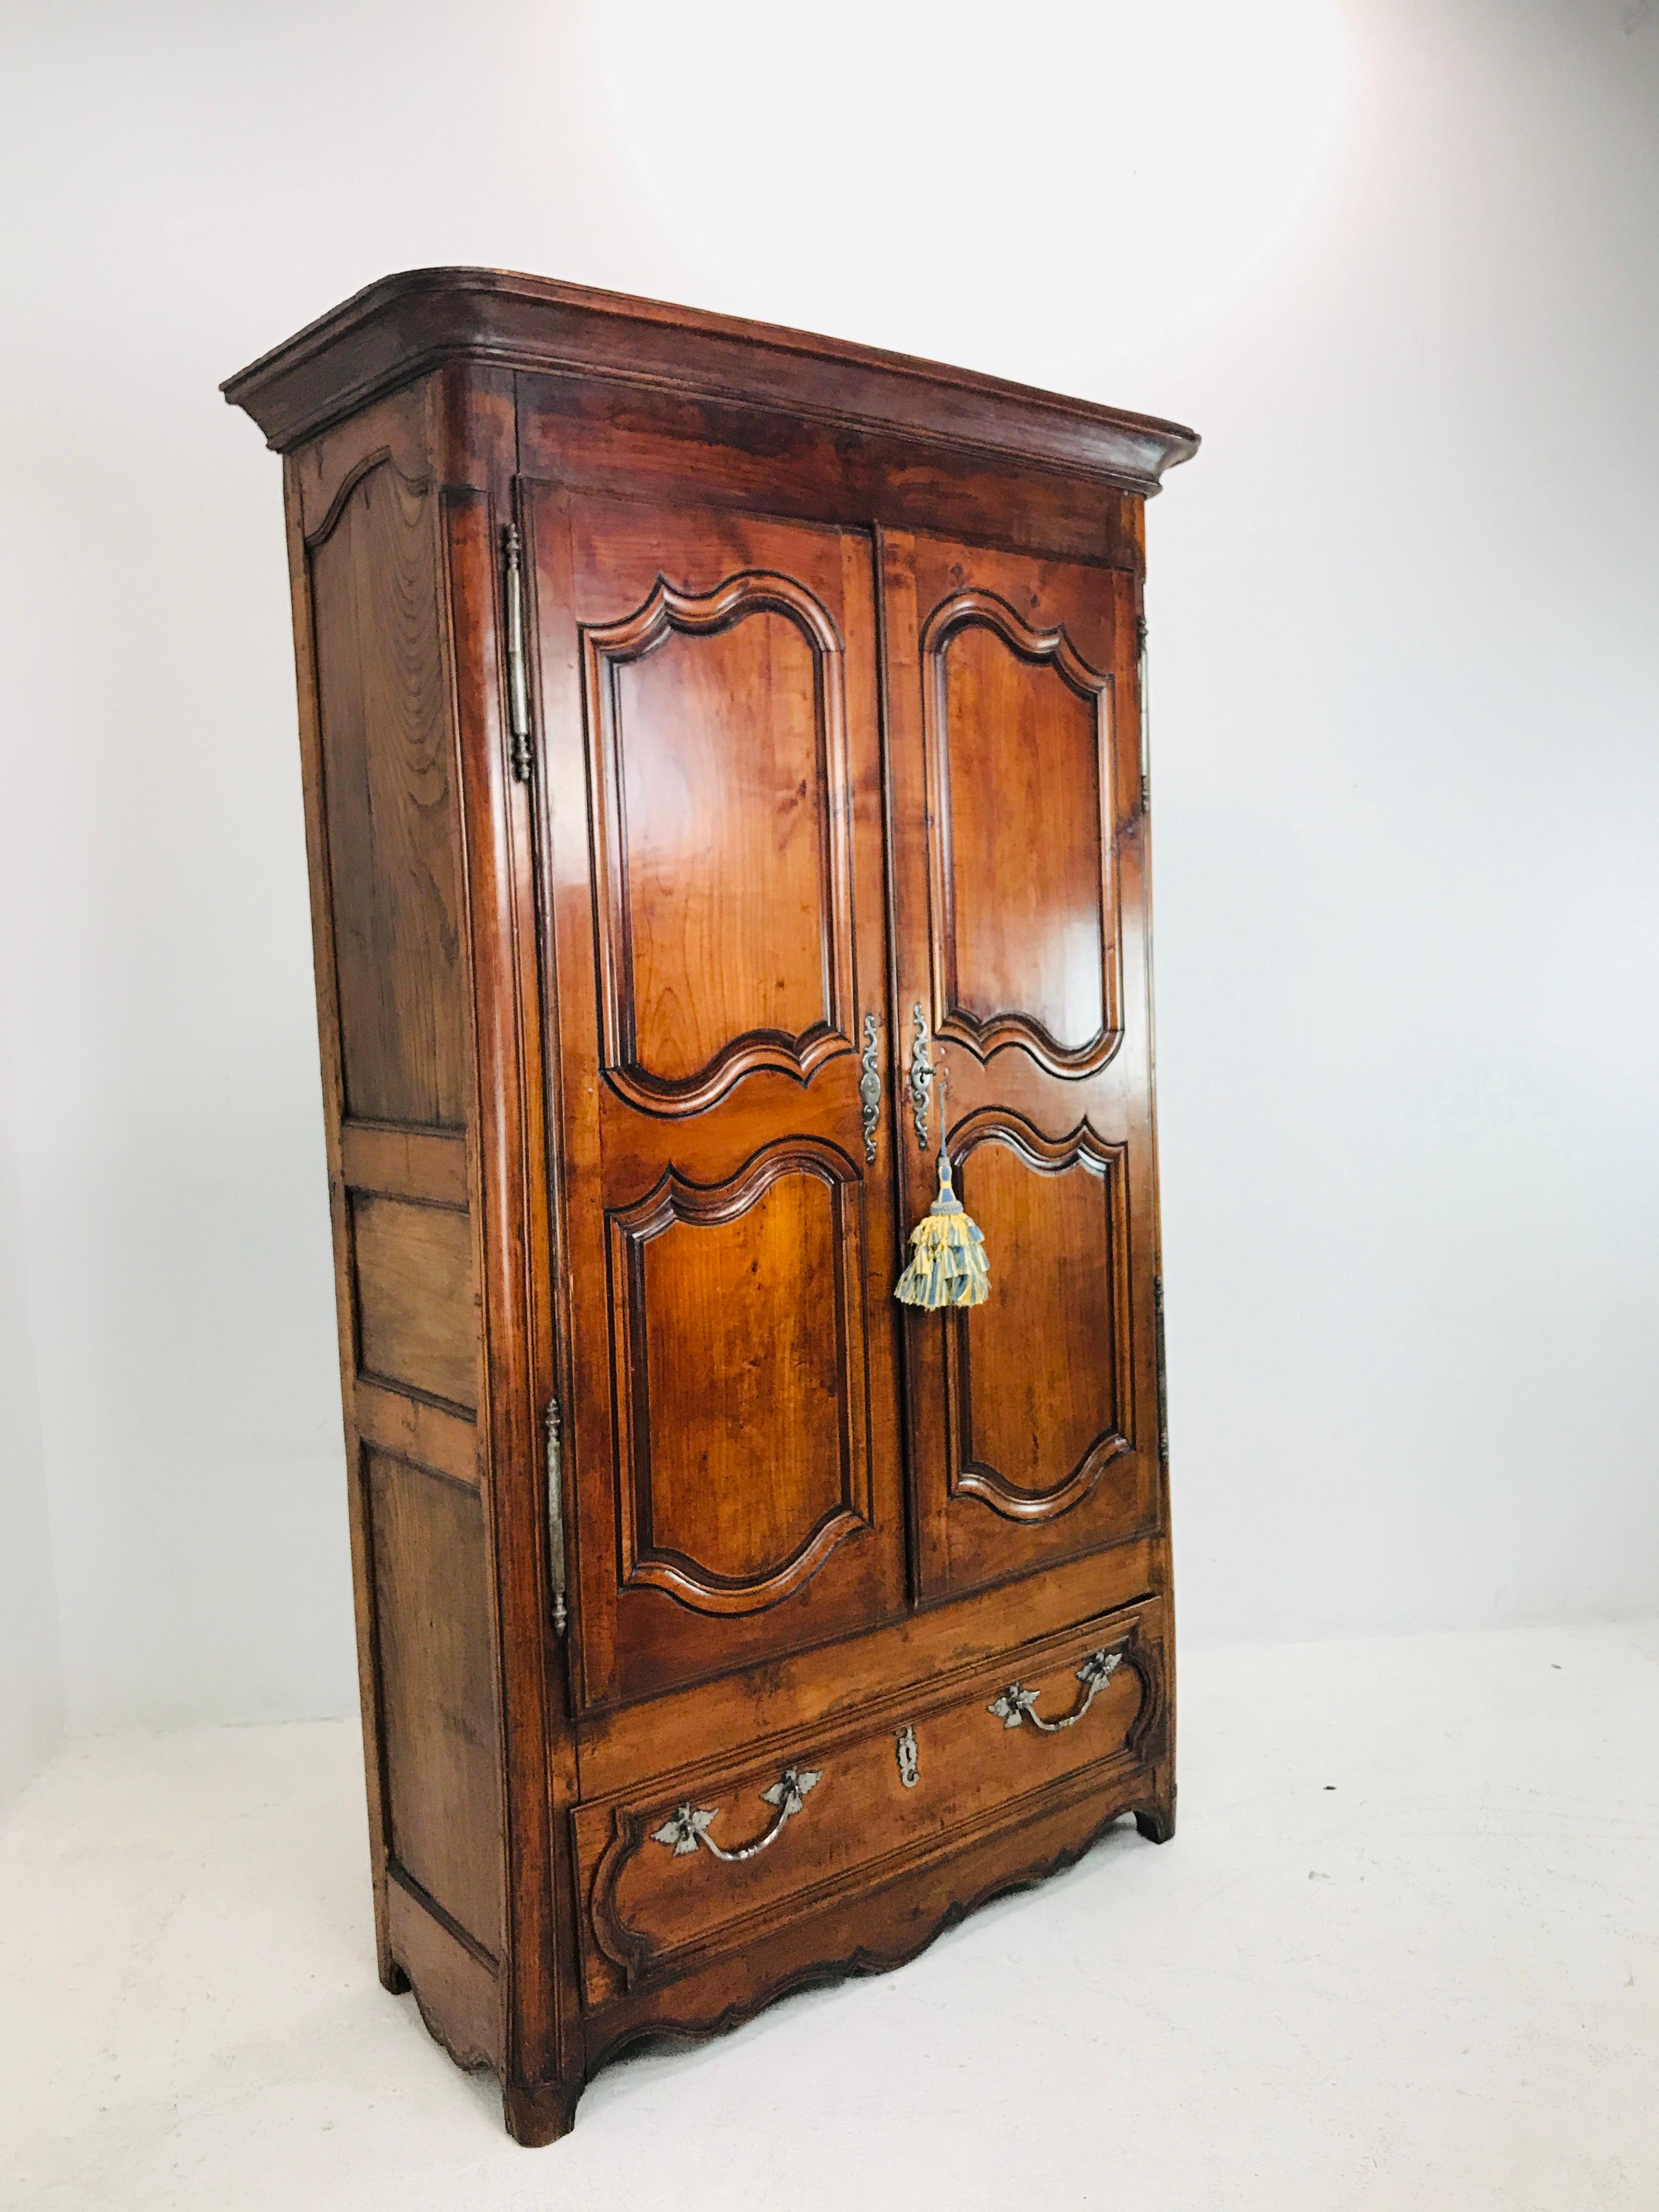 Classic vintage 1930s French 2-door walnut armoire with 3 shelves and bottom drawer. Armoire measures: 37.5